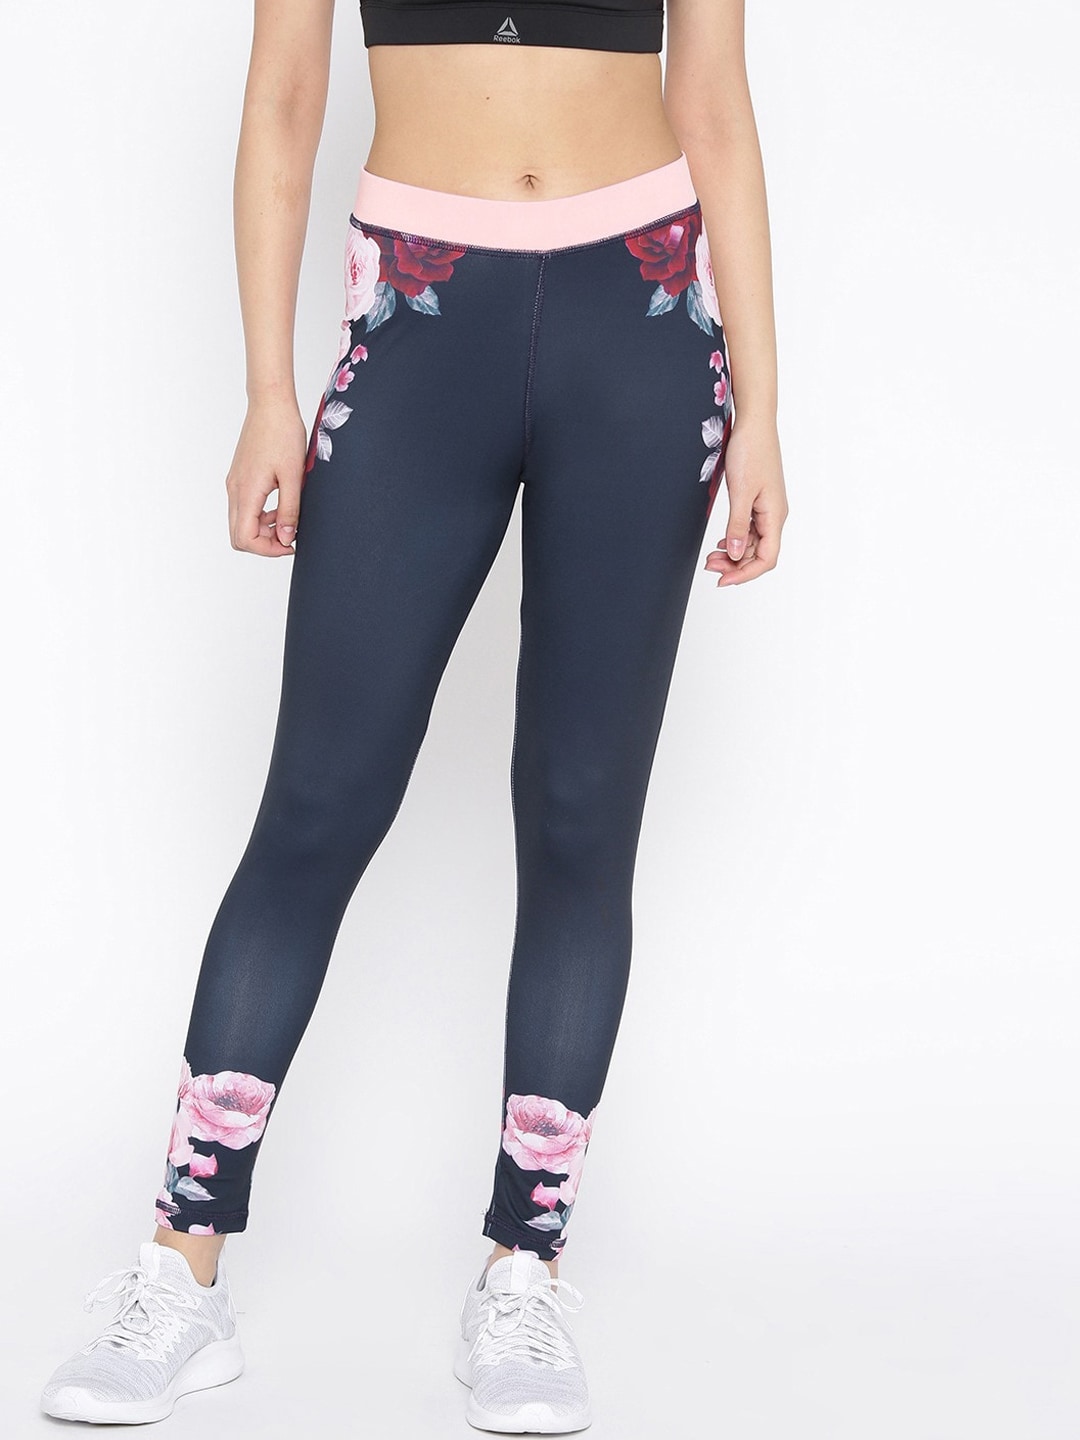 Kanvin Women Printed Tights Price in India